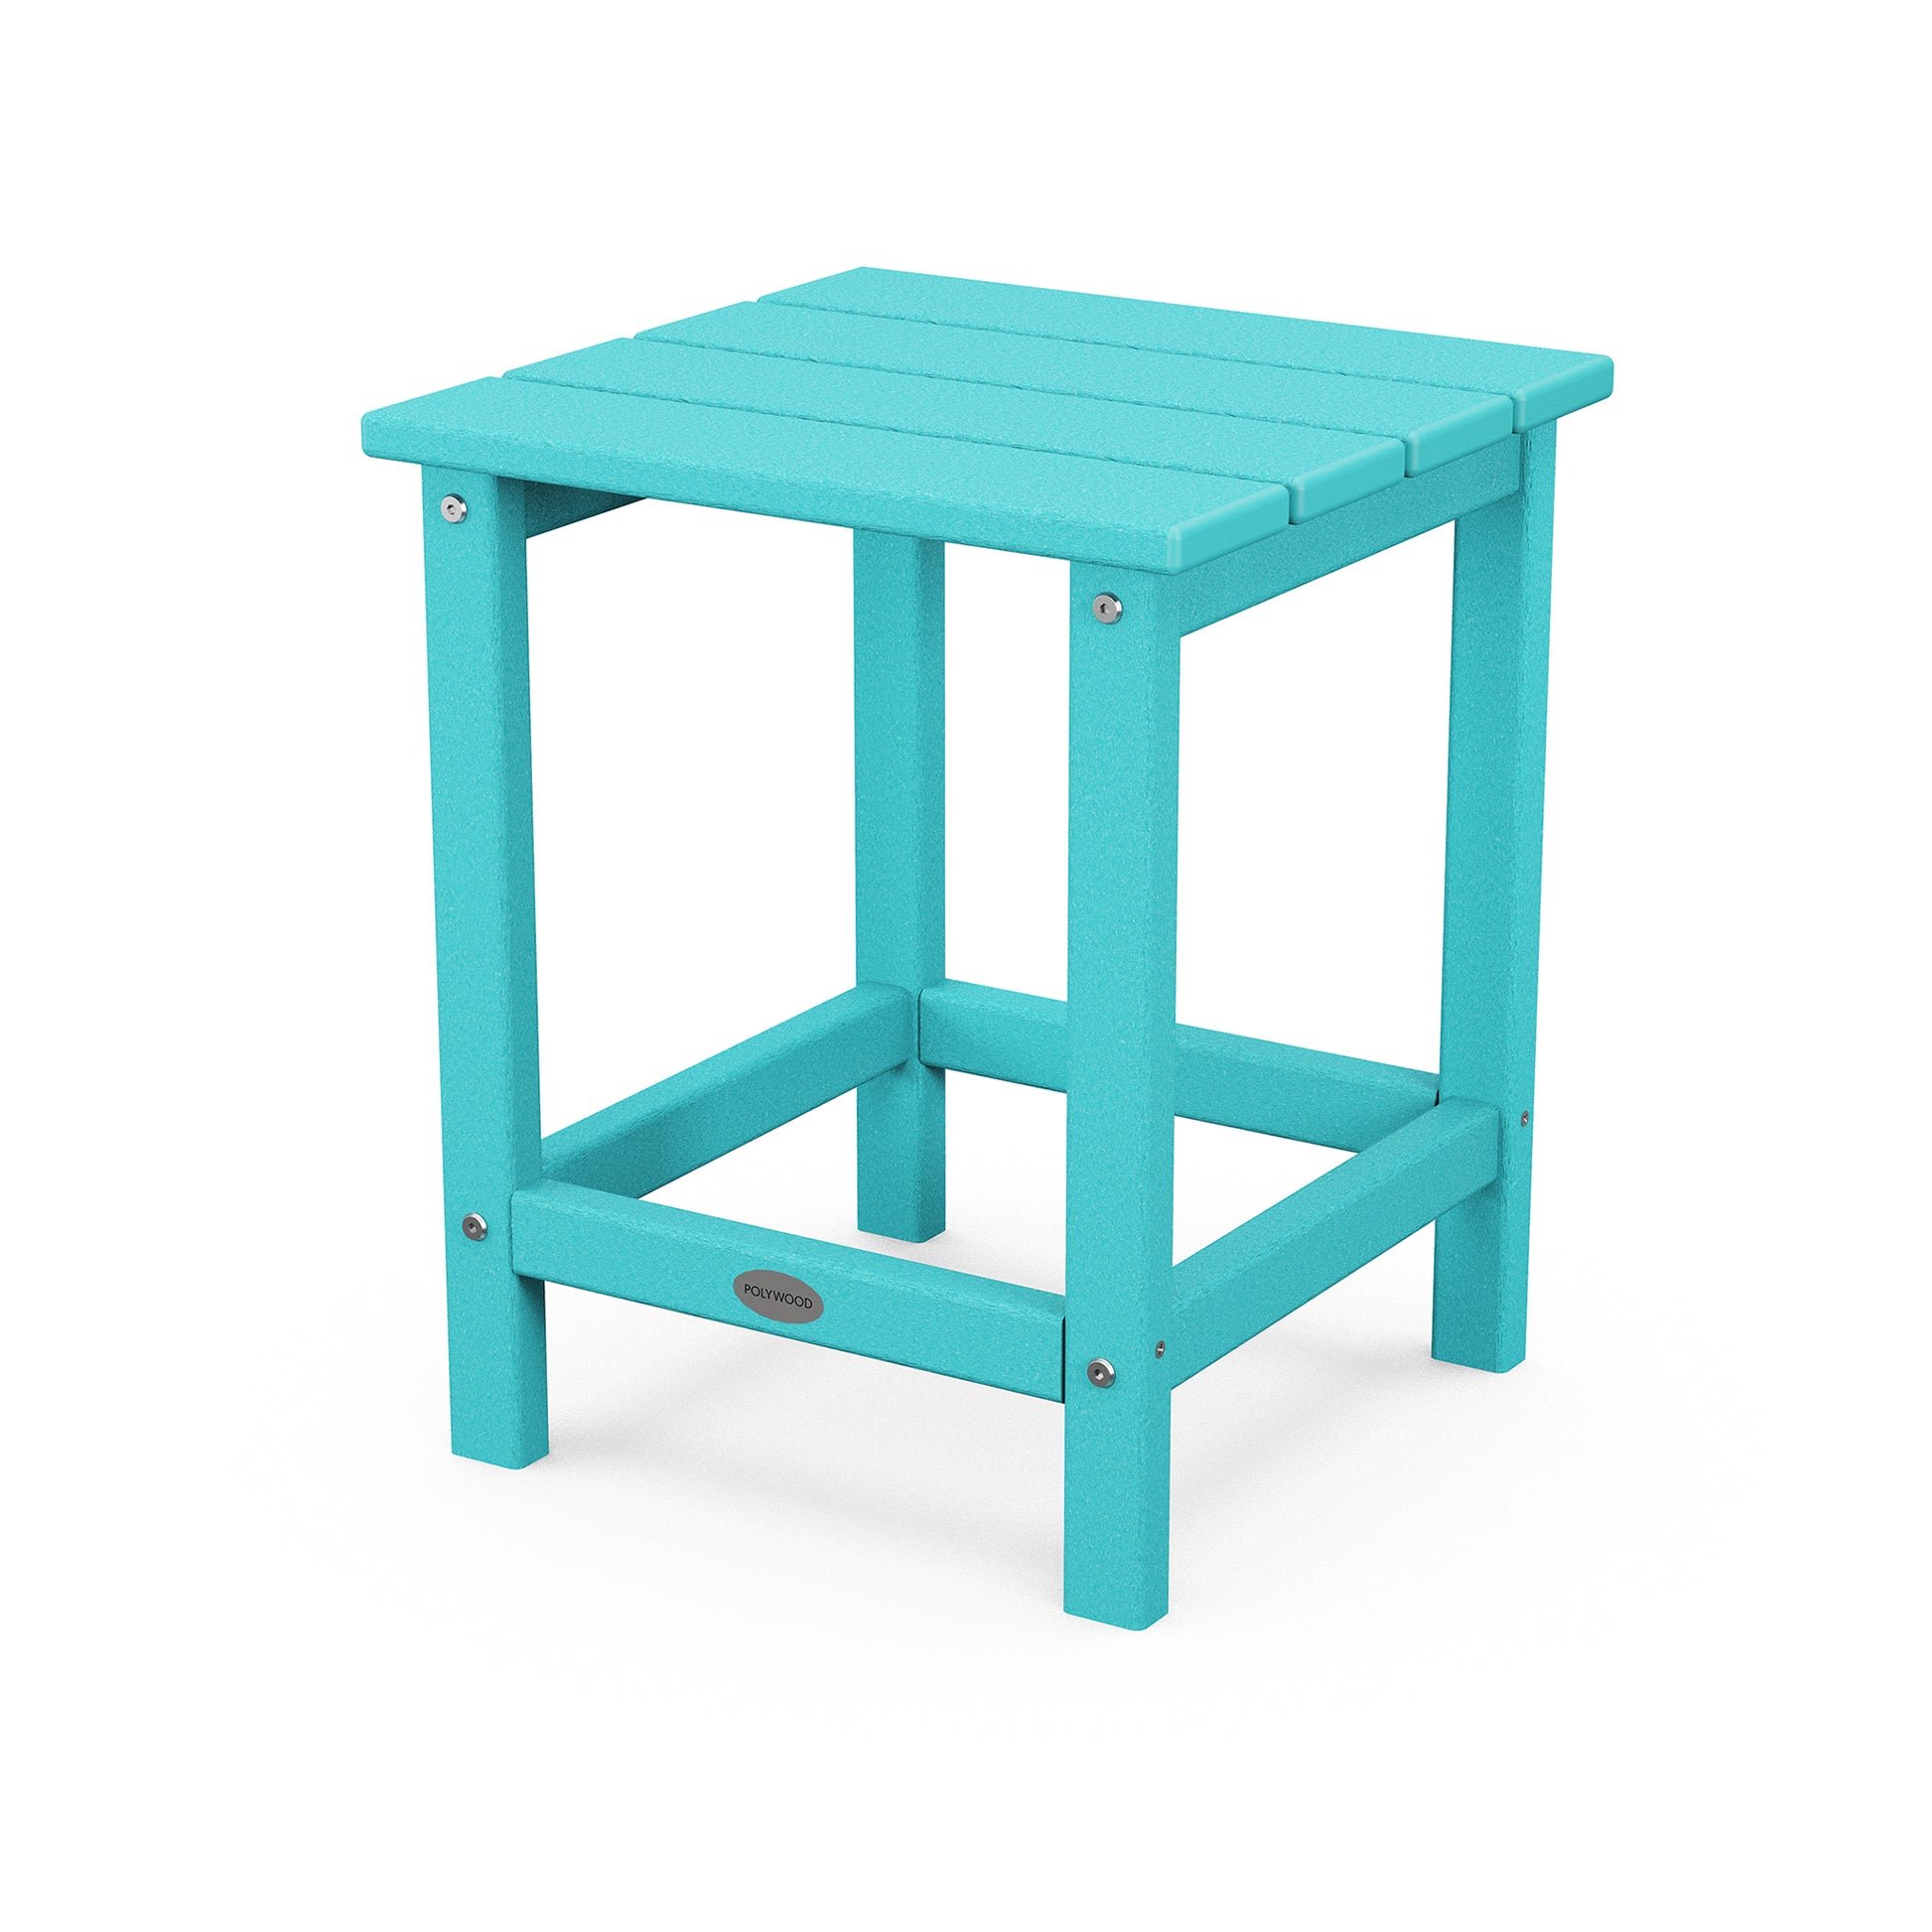 A simple, cyan-colored, square POLYWOOD® Long Island 18" side table with four legs and a lower shelf. The table is shown against a white background.